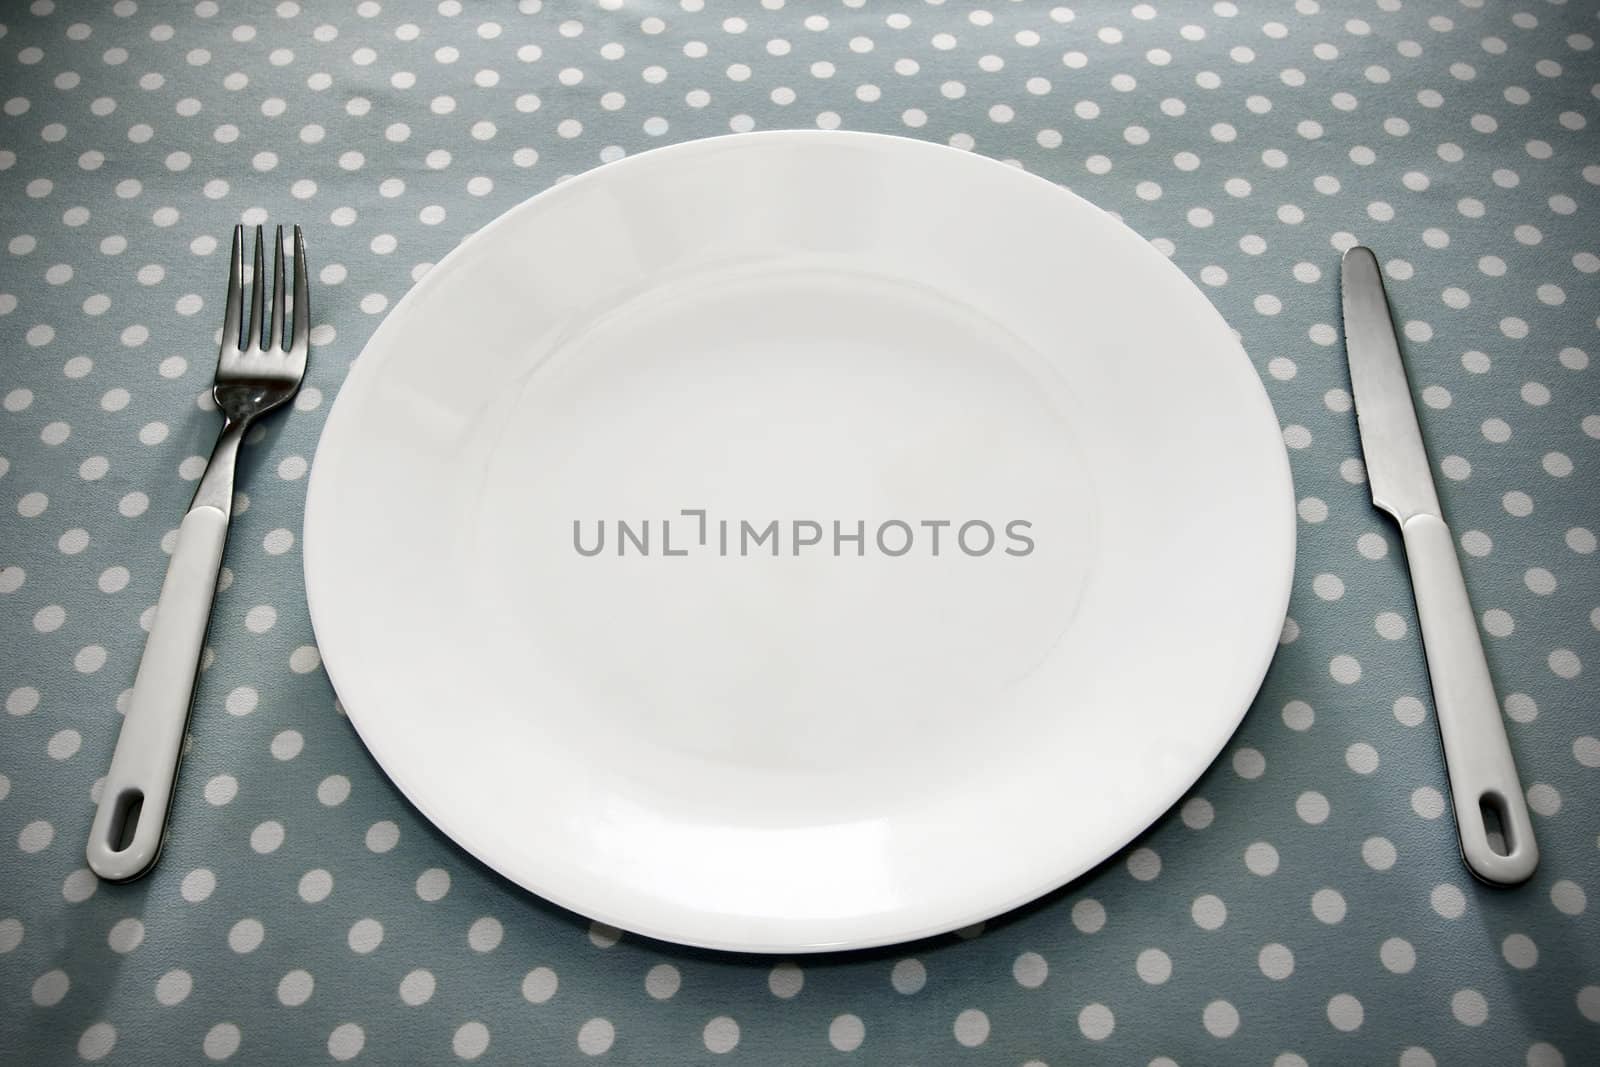 Place setting white plate and grey polka dot by Mirage3